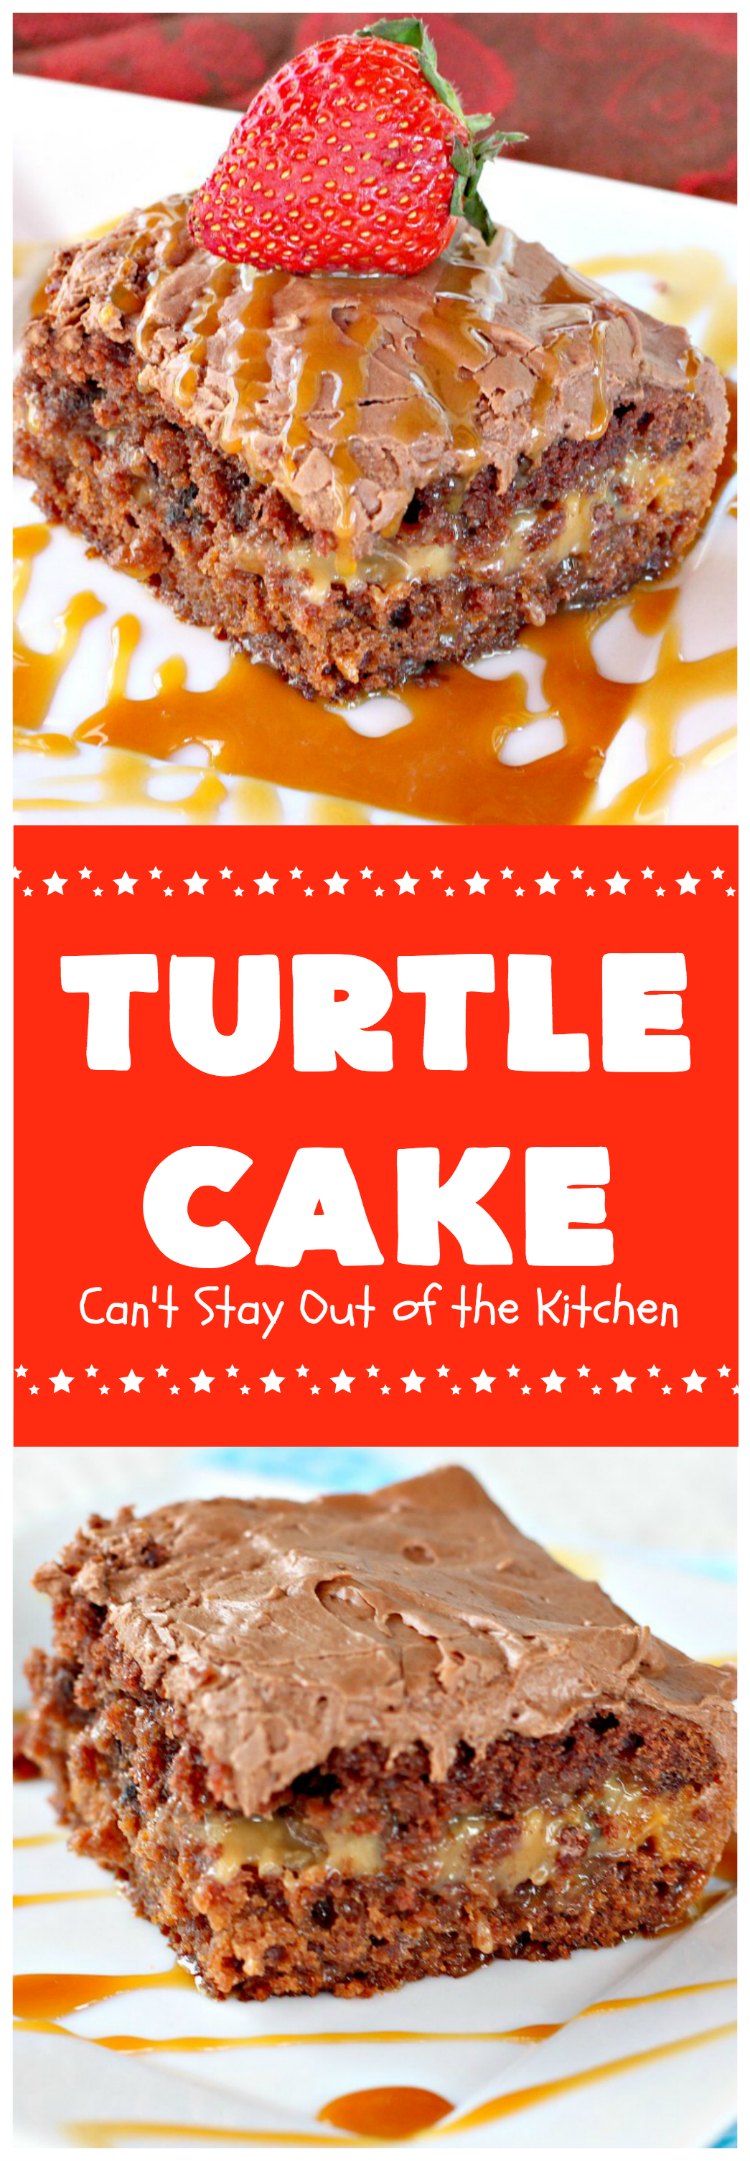 Turtle Cake | Can't Stay Out of the Kitchen